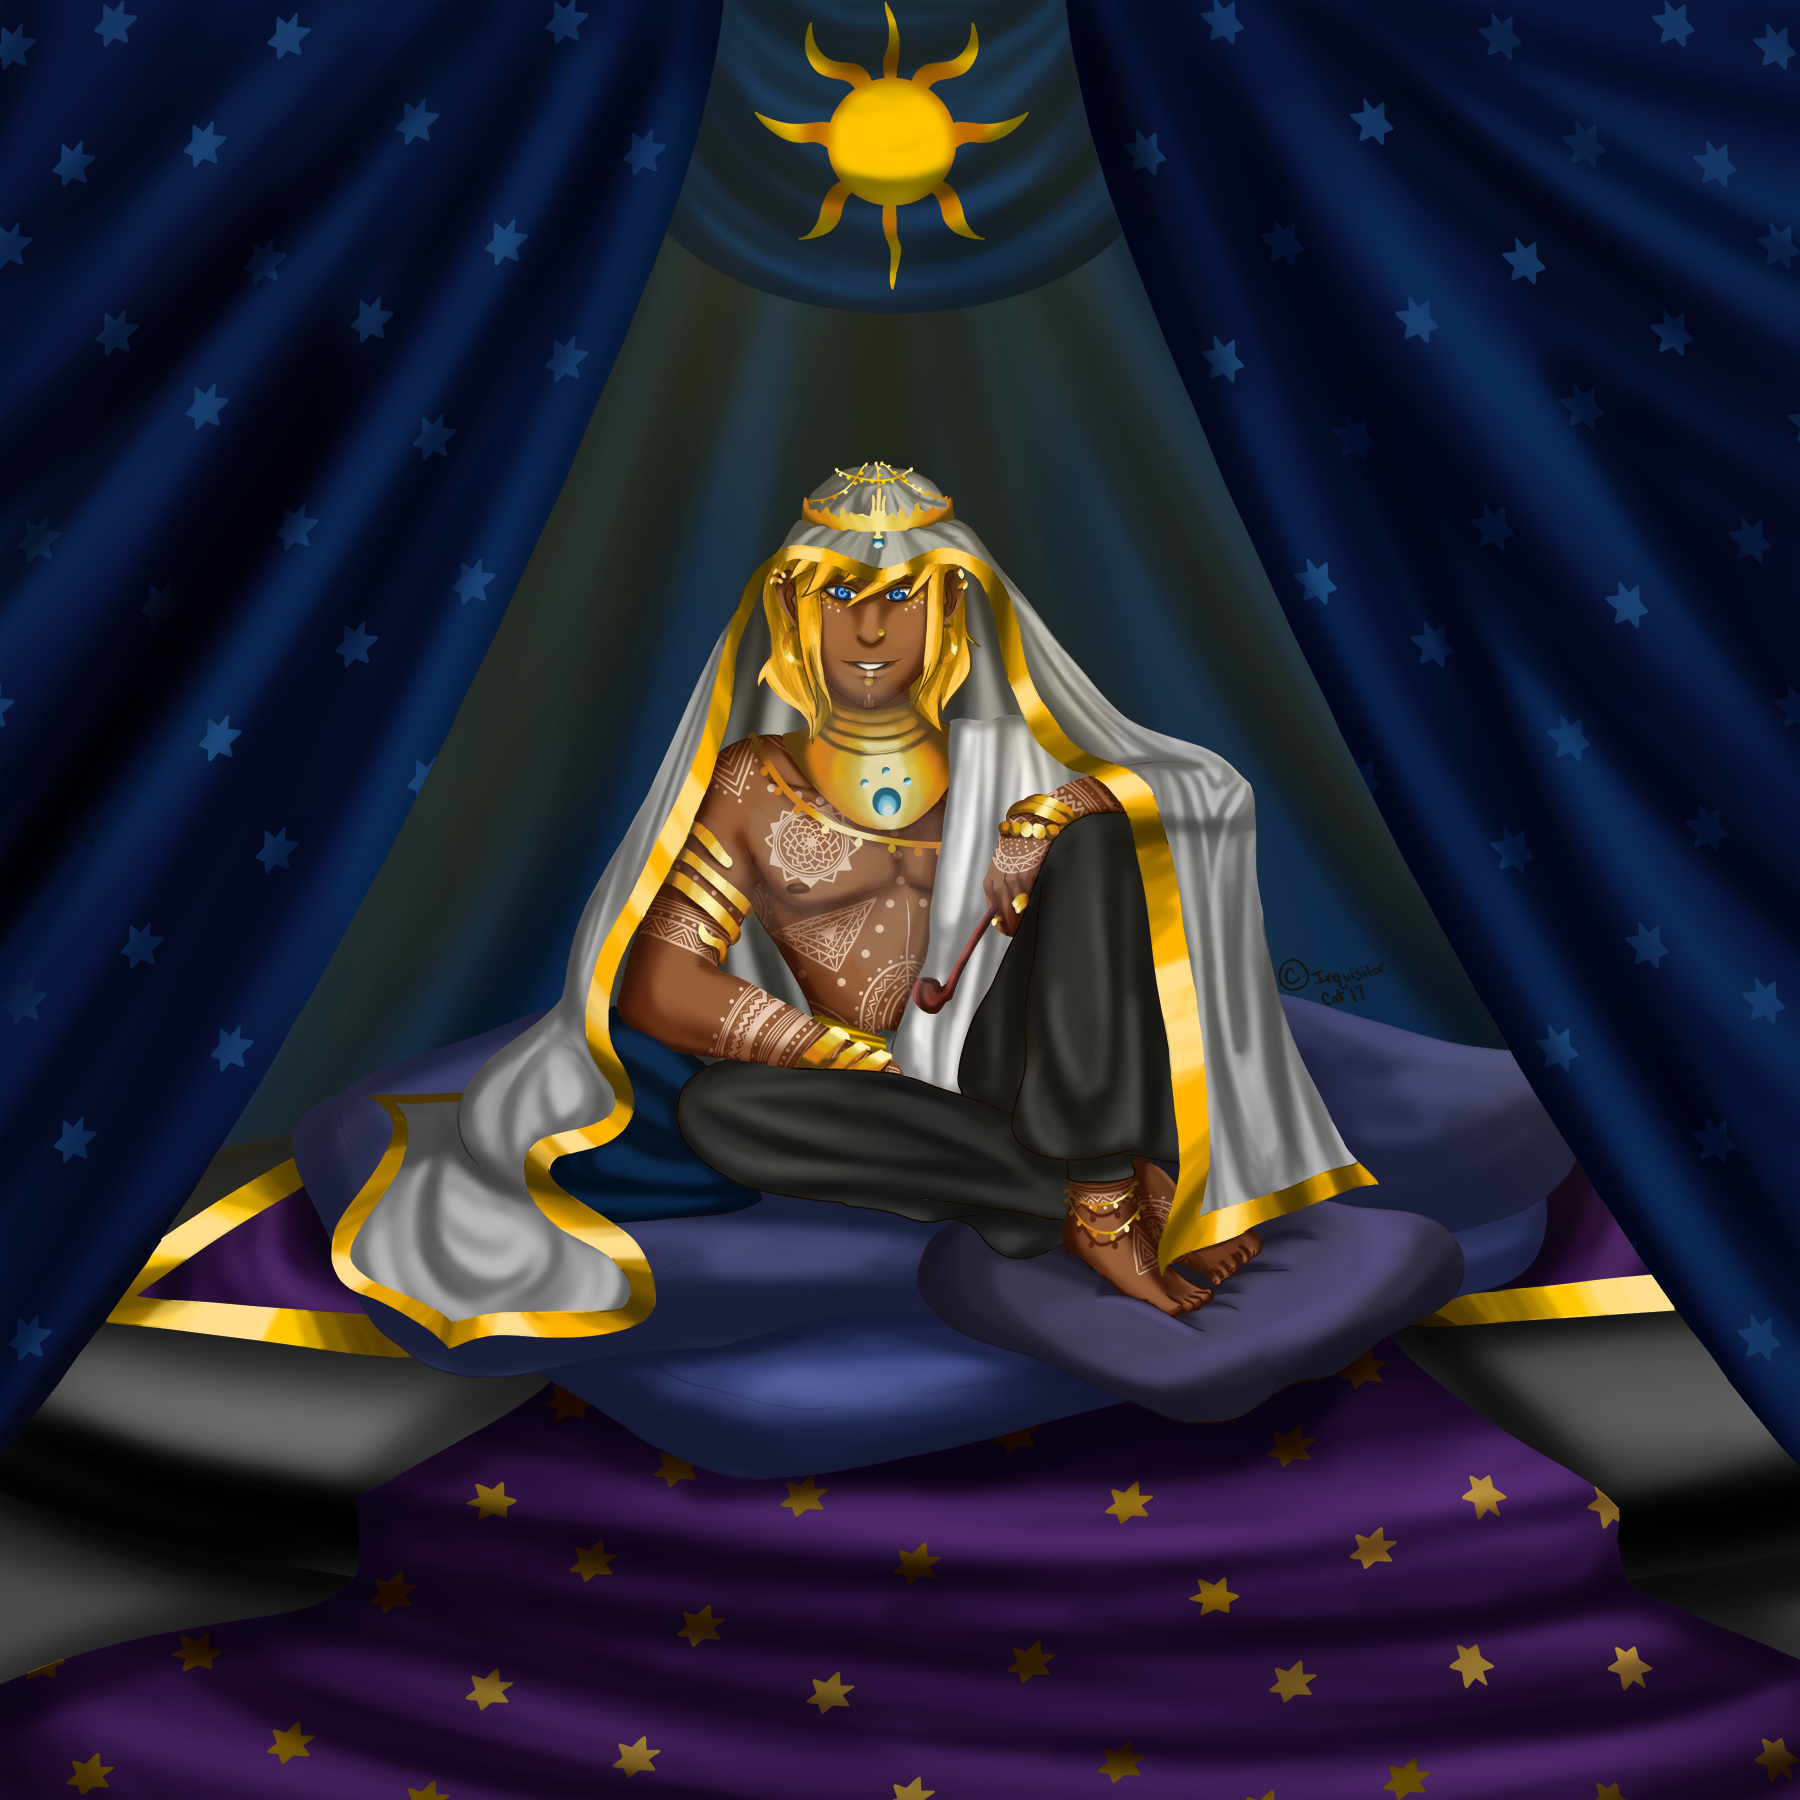 a_man_of_innocence_by_inquisitorcat-dbm2rkt.png